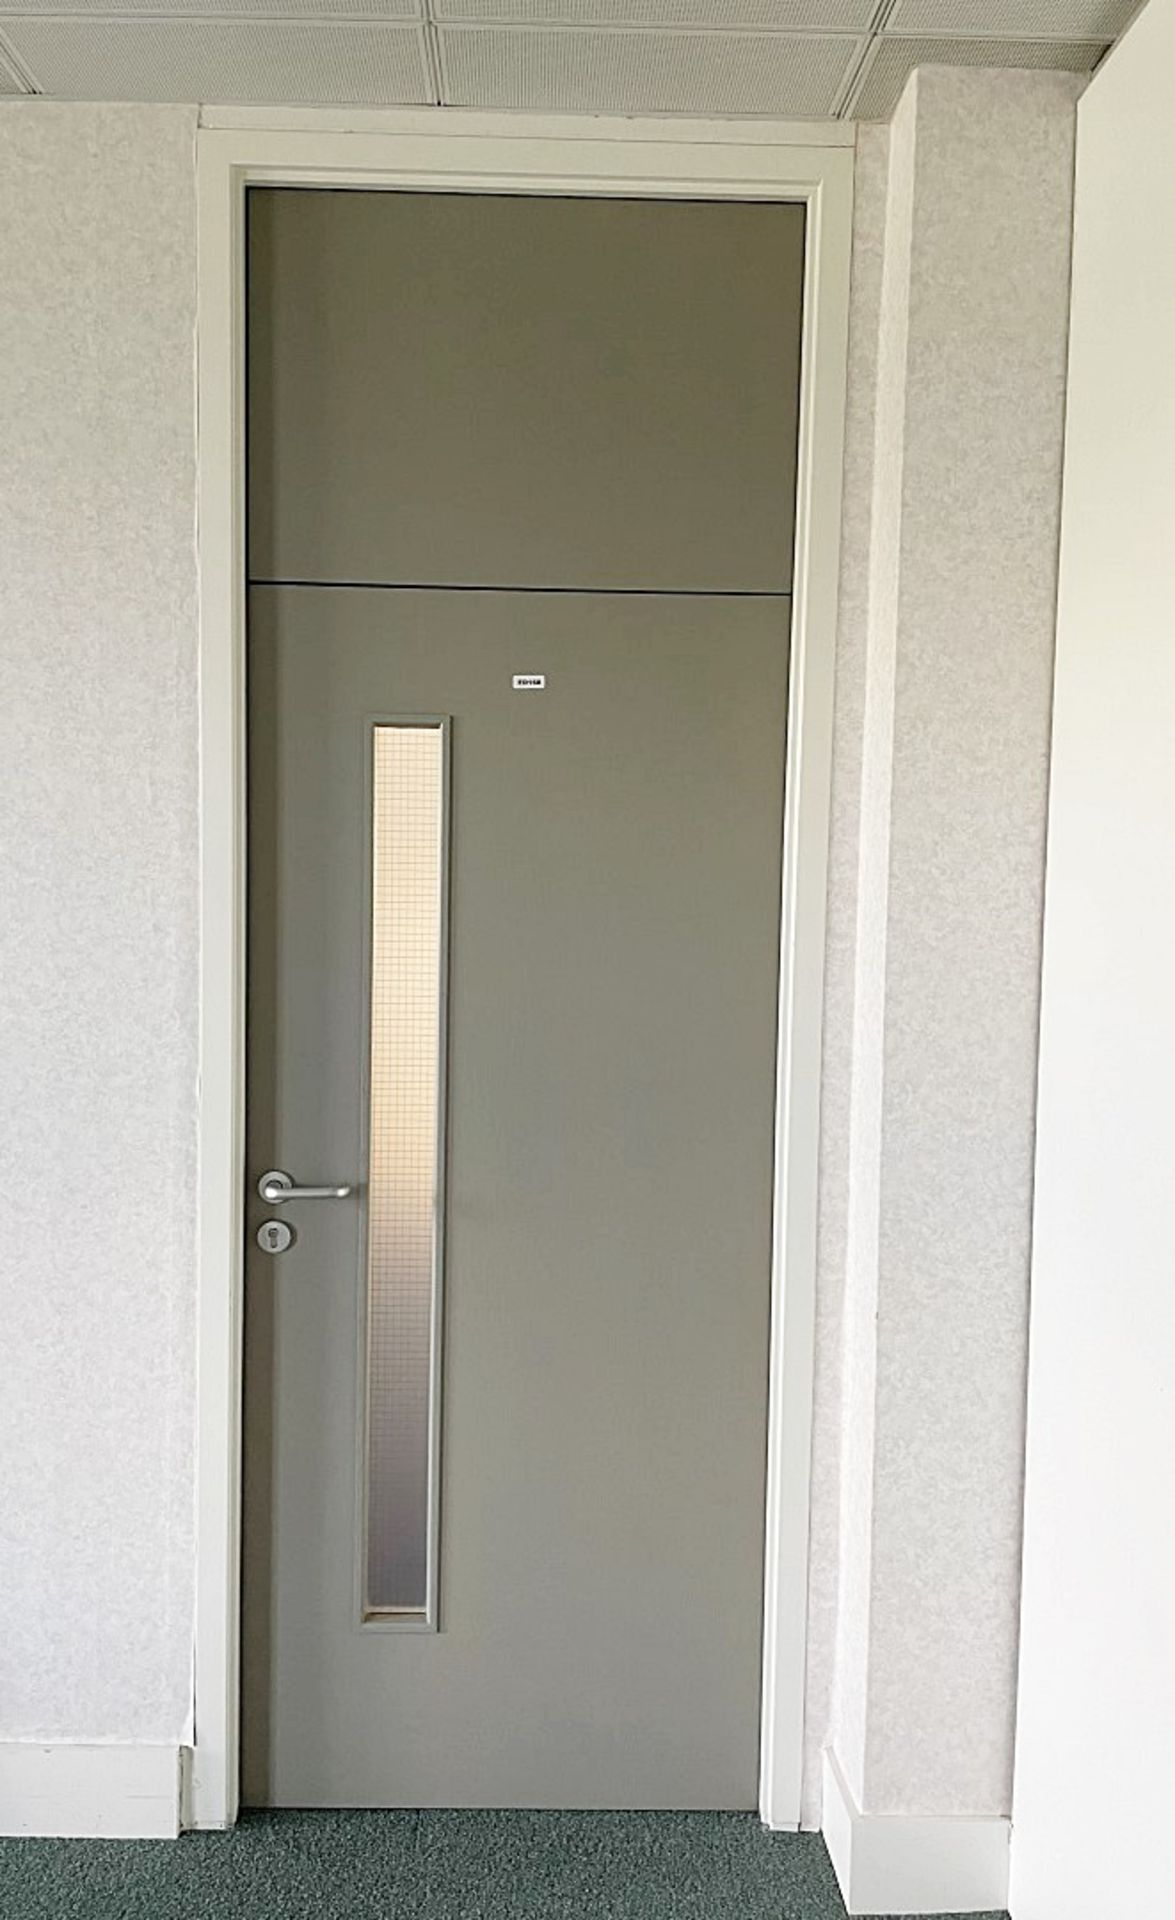 1 x Office Door With Frame And Top Panel - Dimensions: H265 x W99cm - Ref: ED168 - To Be Removed - Image 2 of 5